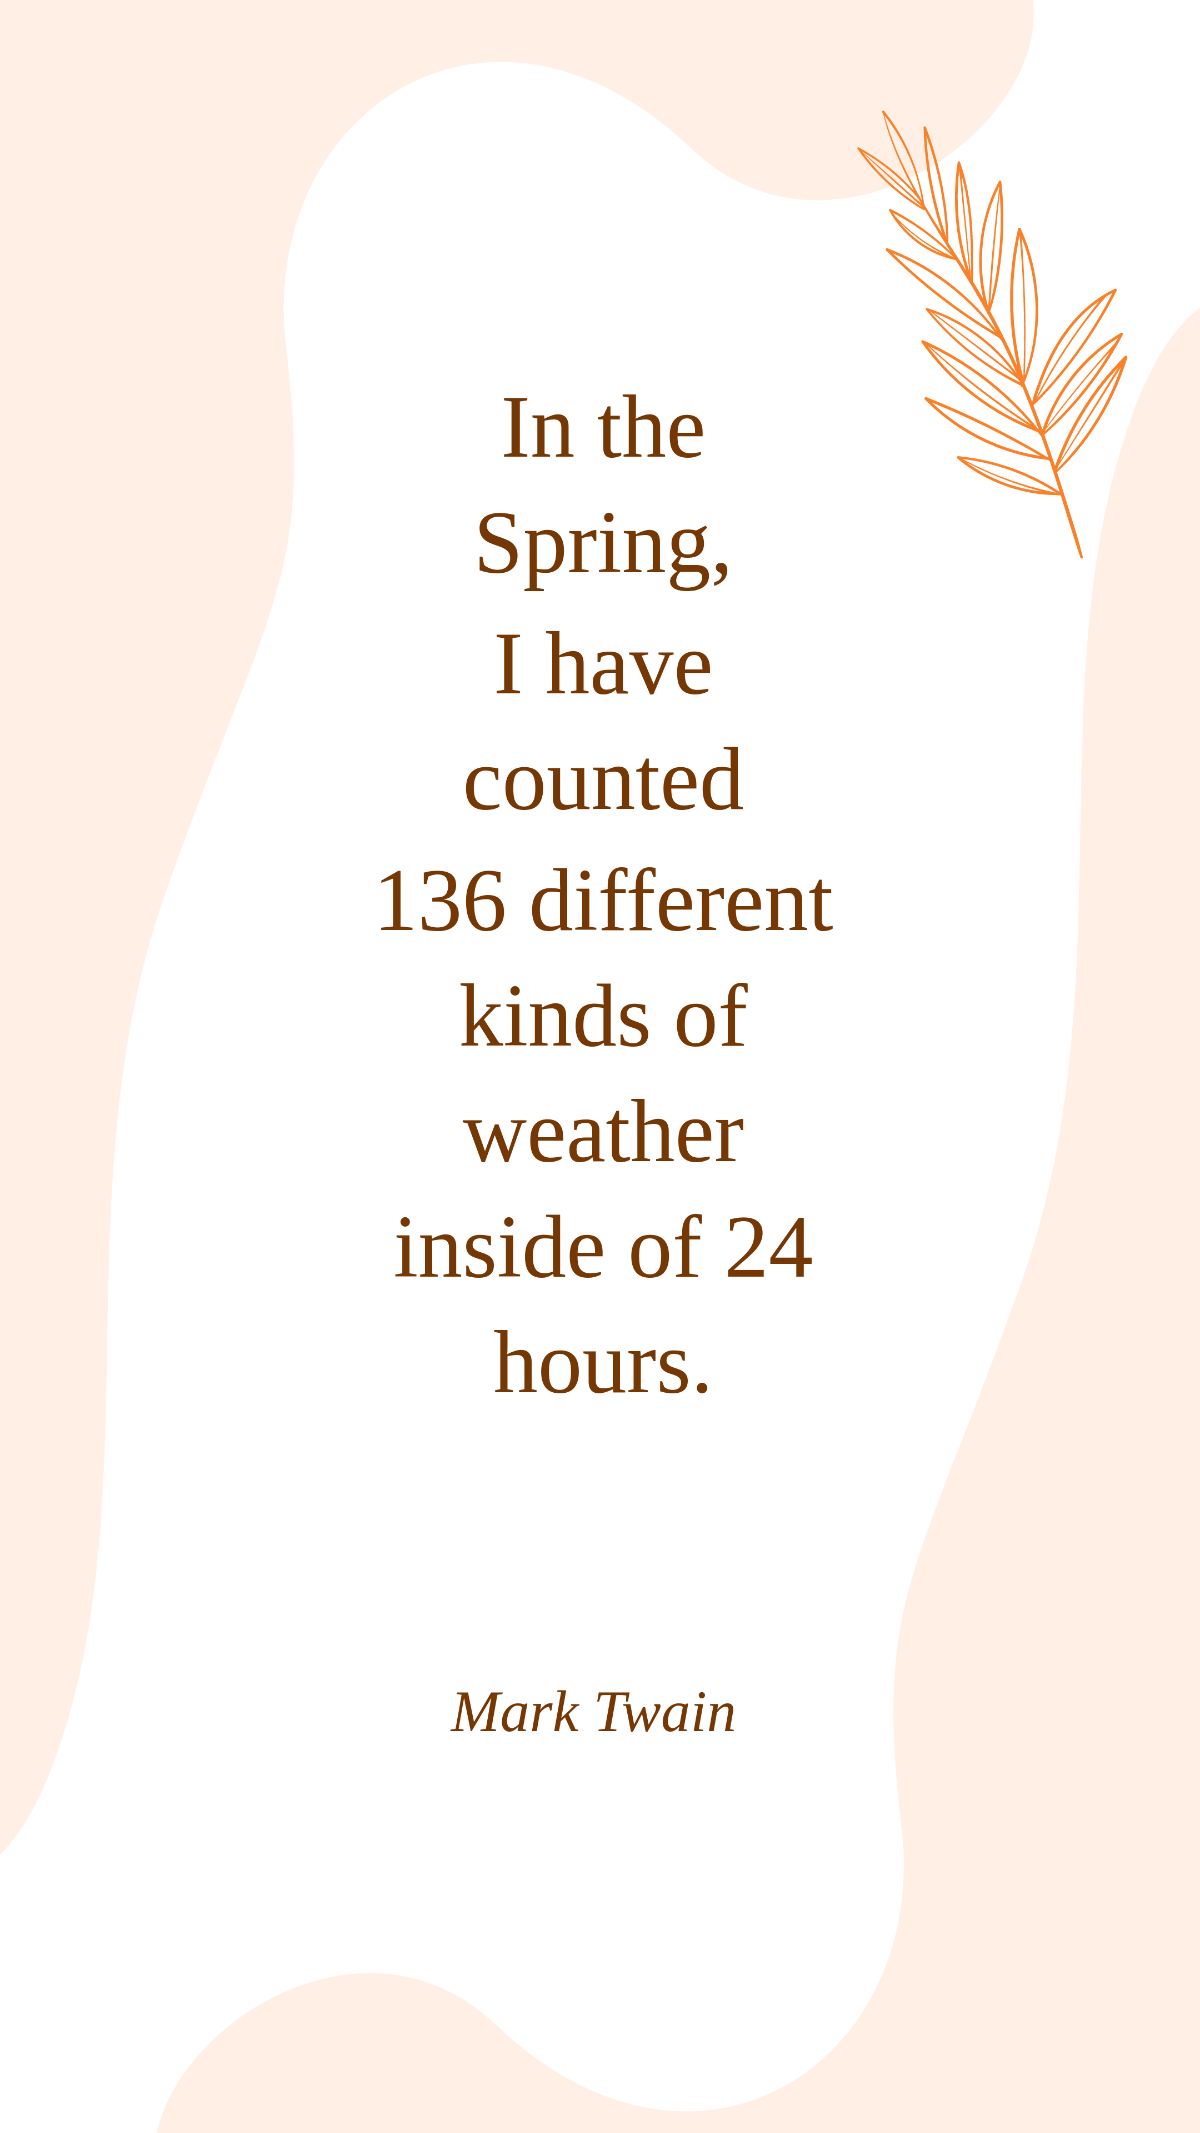 Free Mark Twain - In the Spring, I have counted 136 different kinds of weather inside of 24 hours. Template